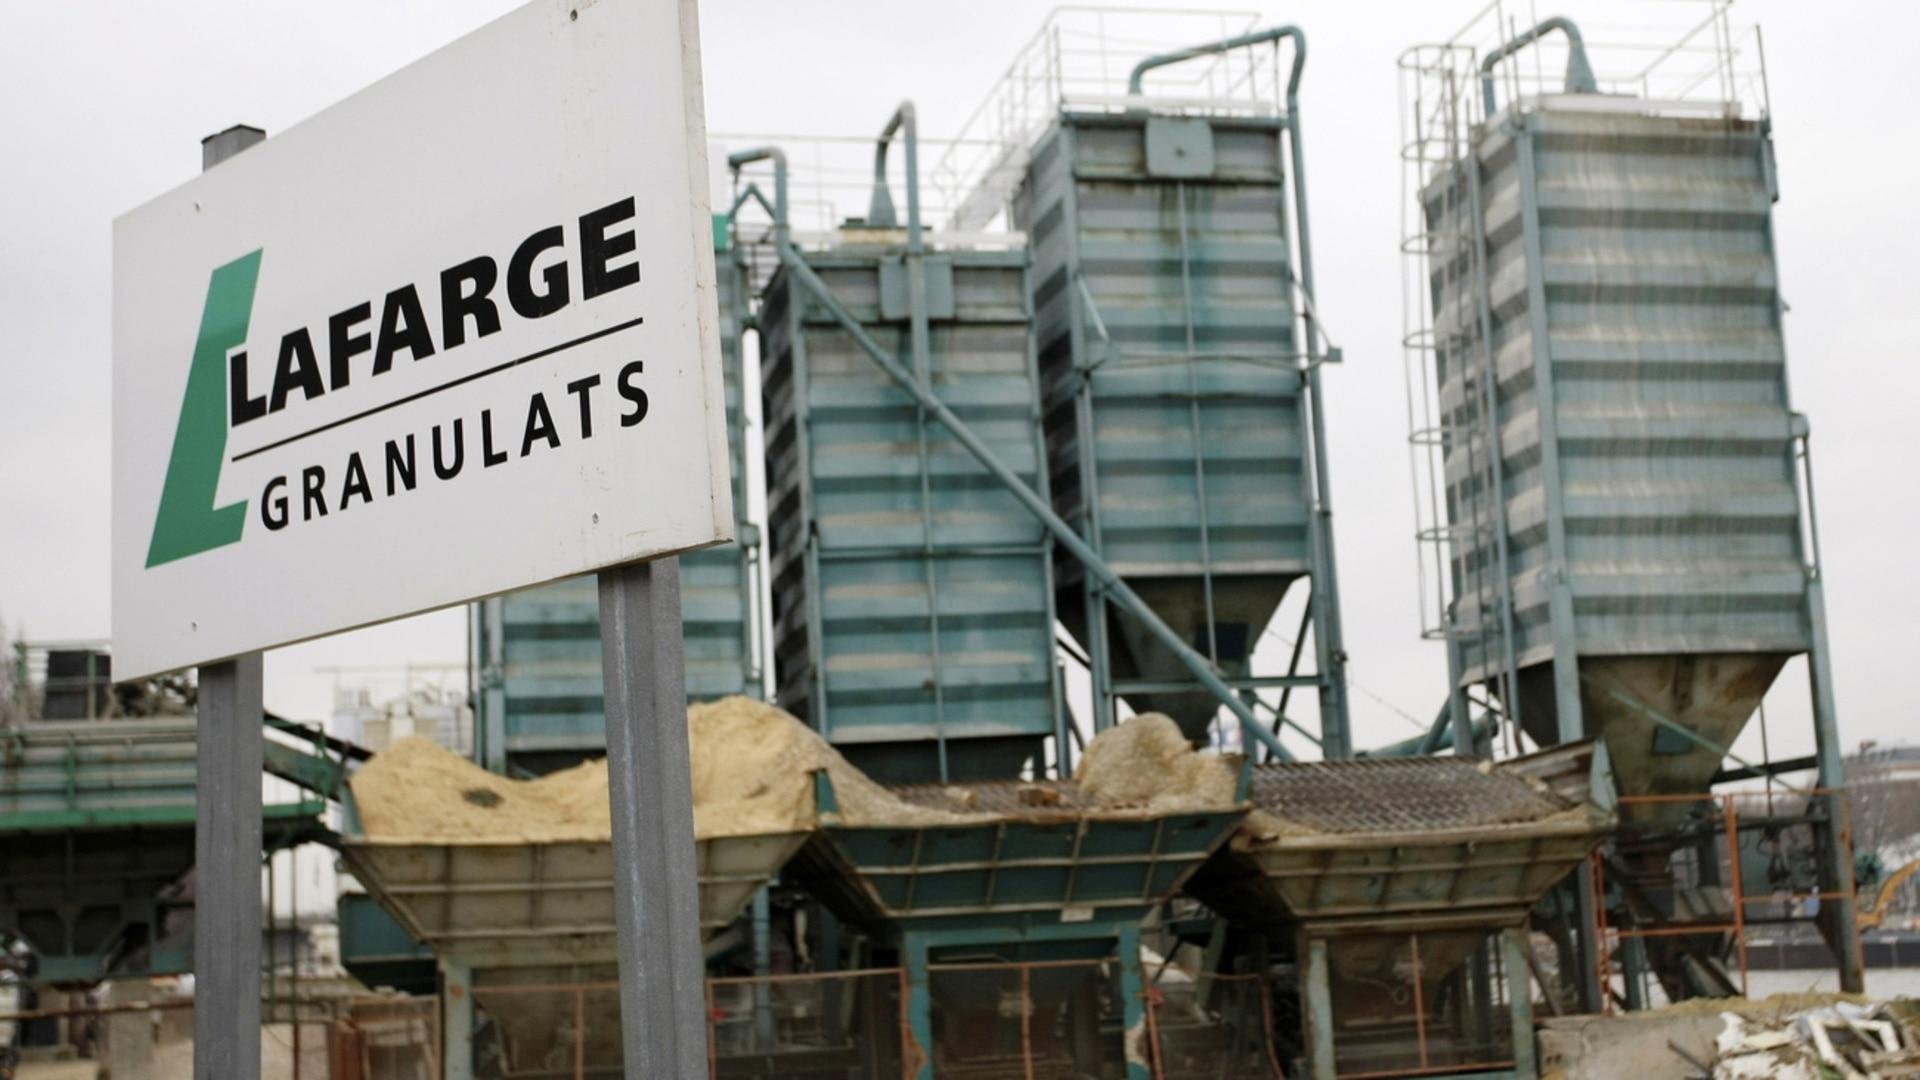 French court reinstates crimes against humanity probe in Lafarge Syria case - SWI swissinfo.ch